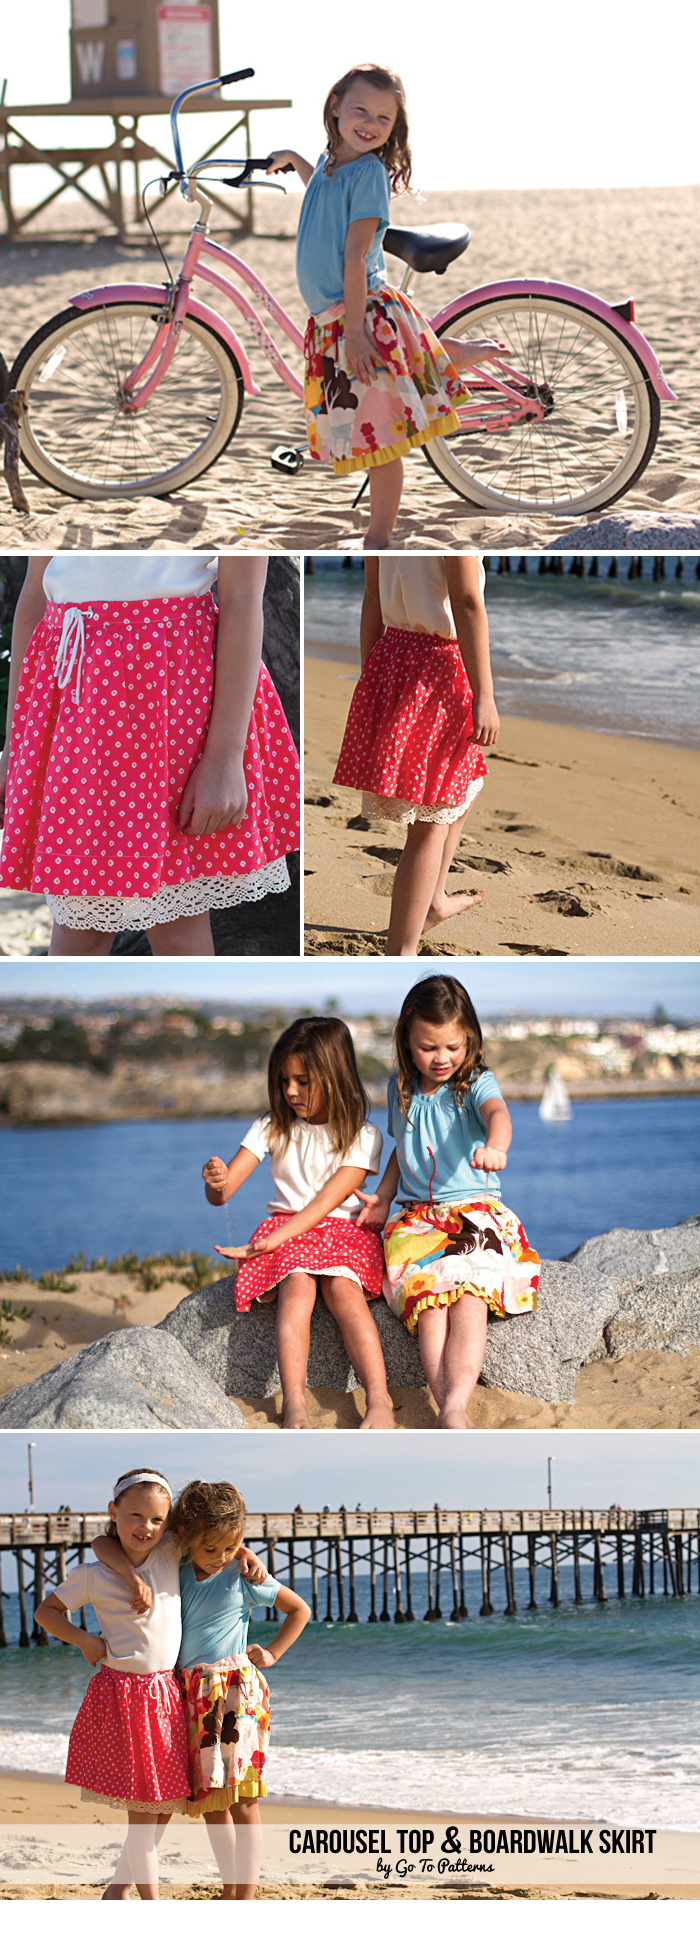 FREE skirt pattern for girls. Download today!